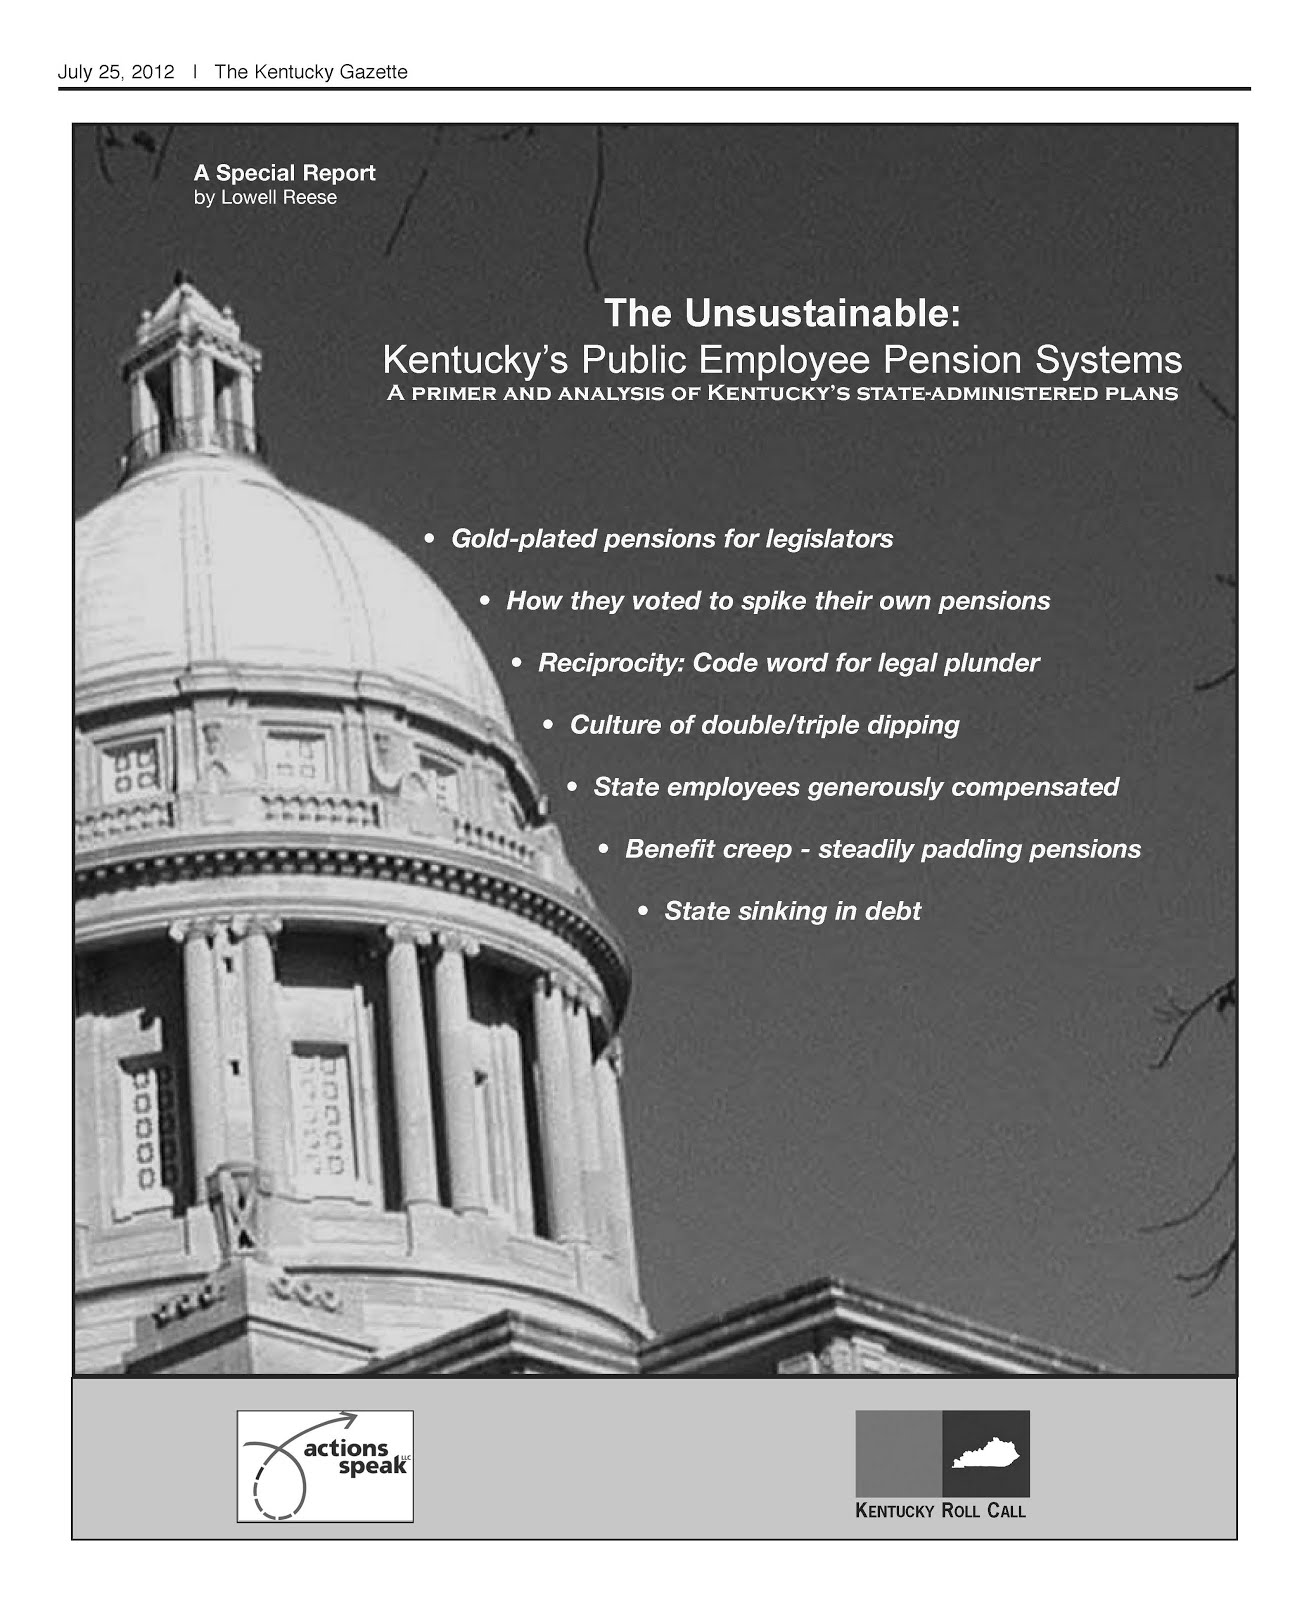 Kentucky's public employee pensions: A primer on the state's six systems and abuses